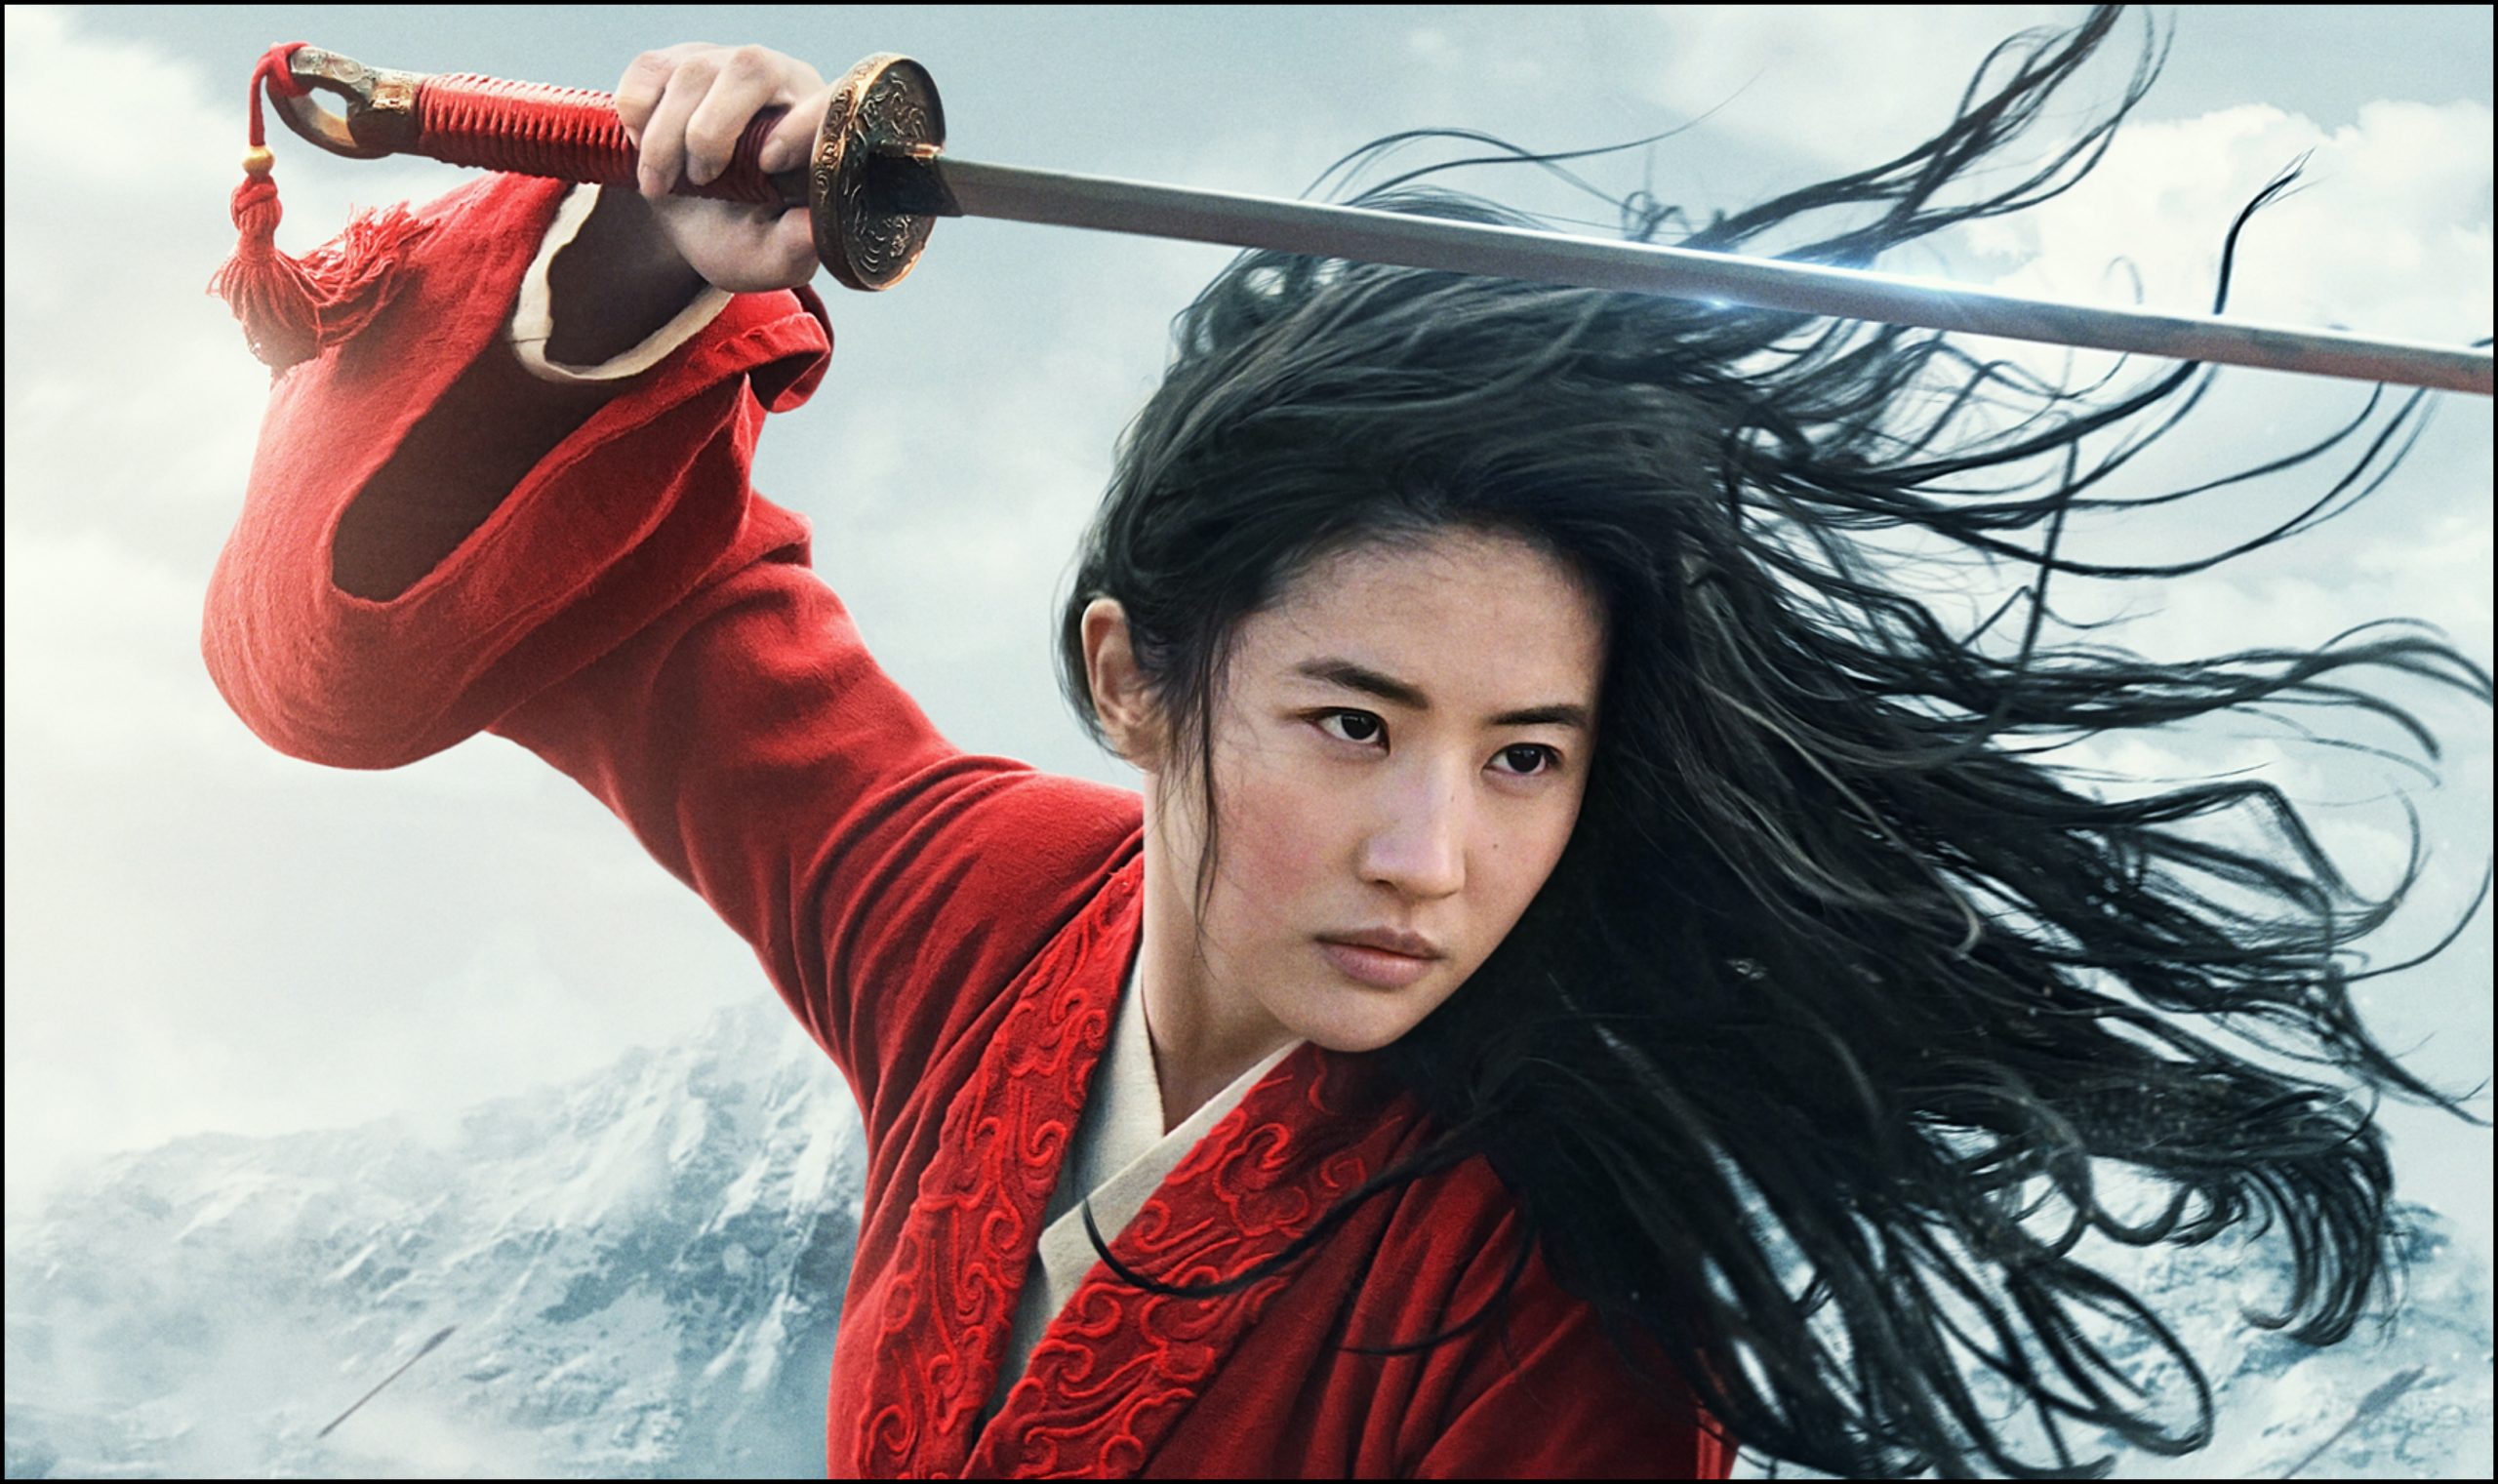 Check Out The Final Trailer for Disney’s Live-Action ‘Mulan’